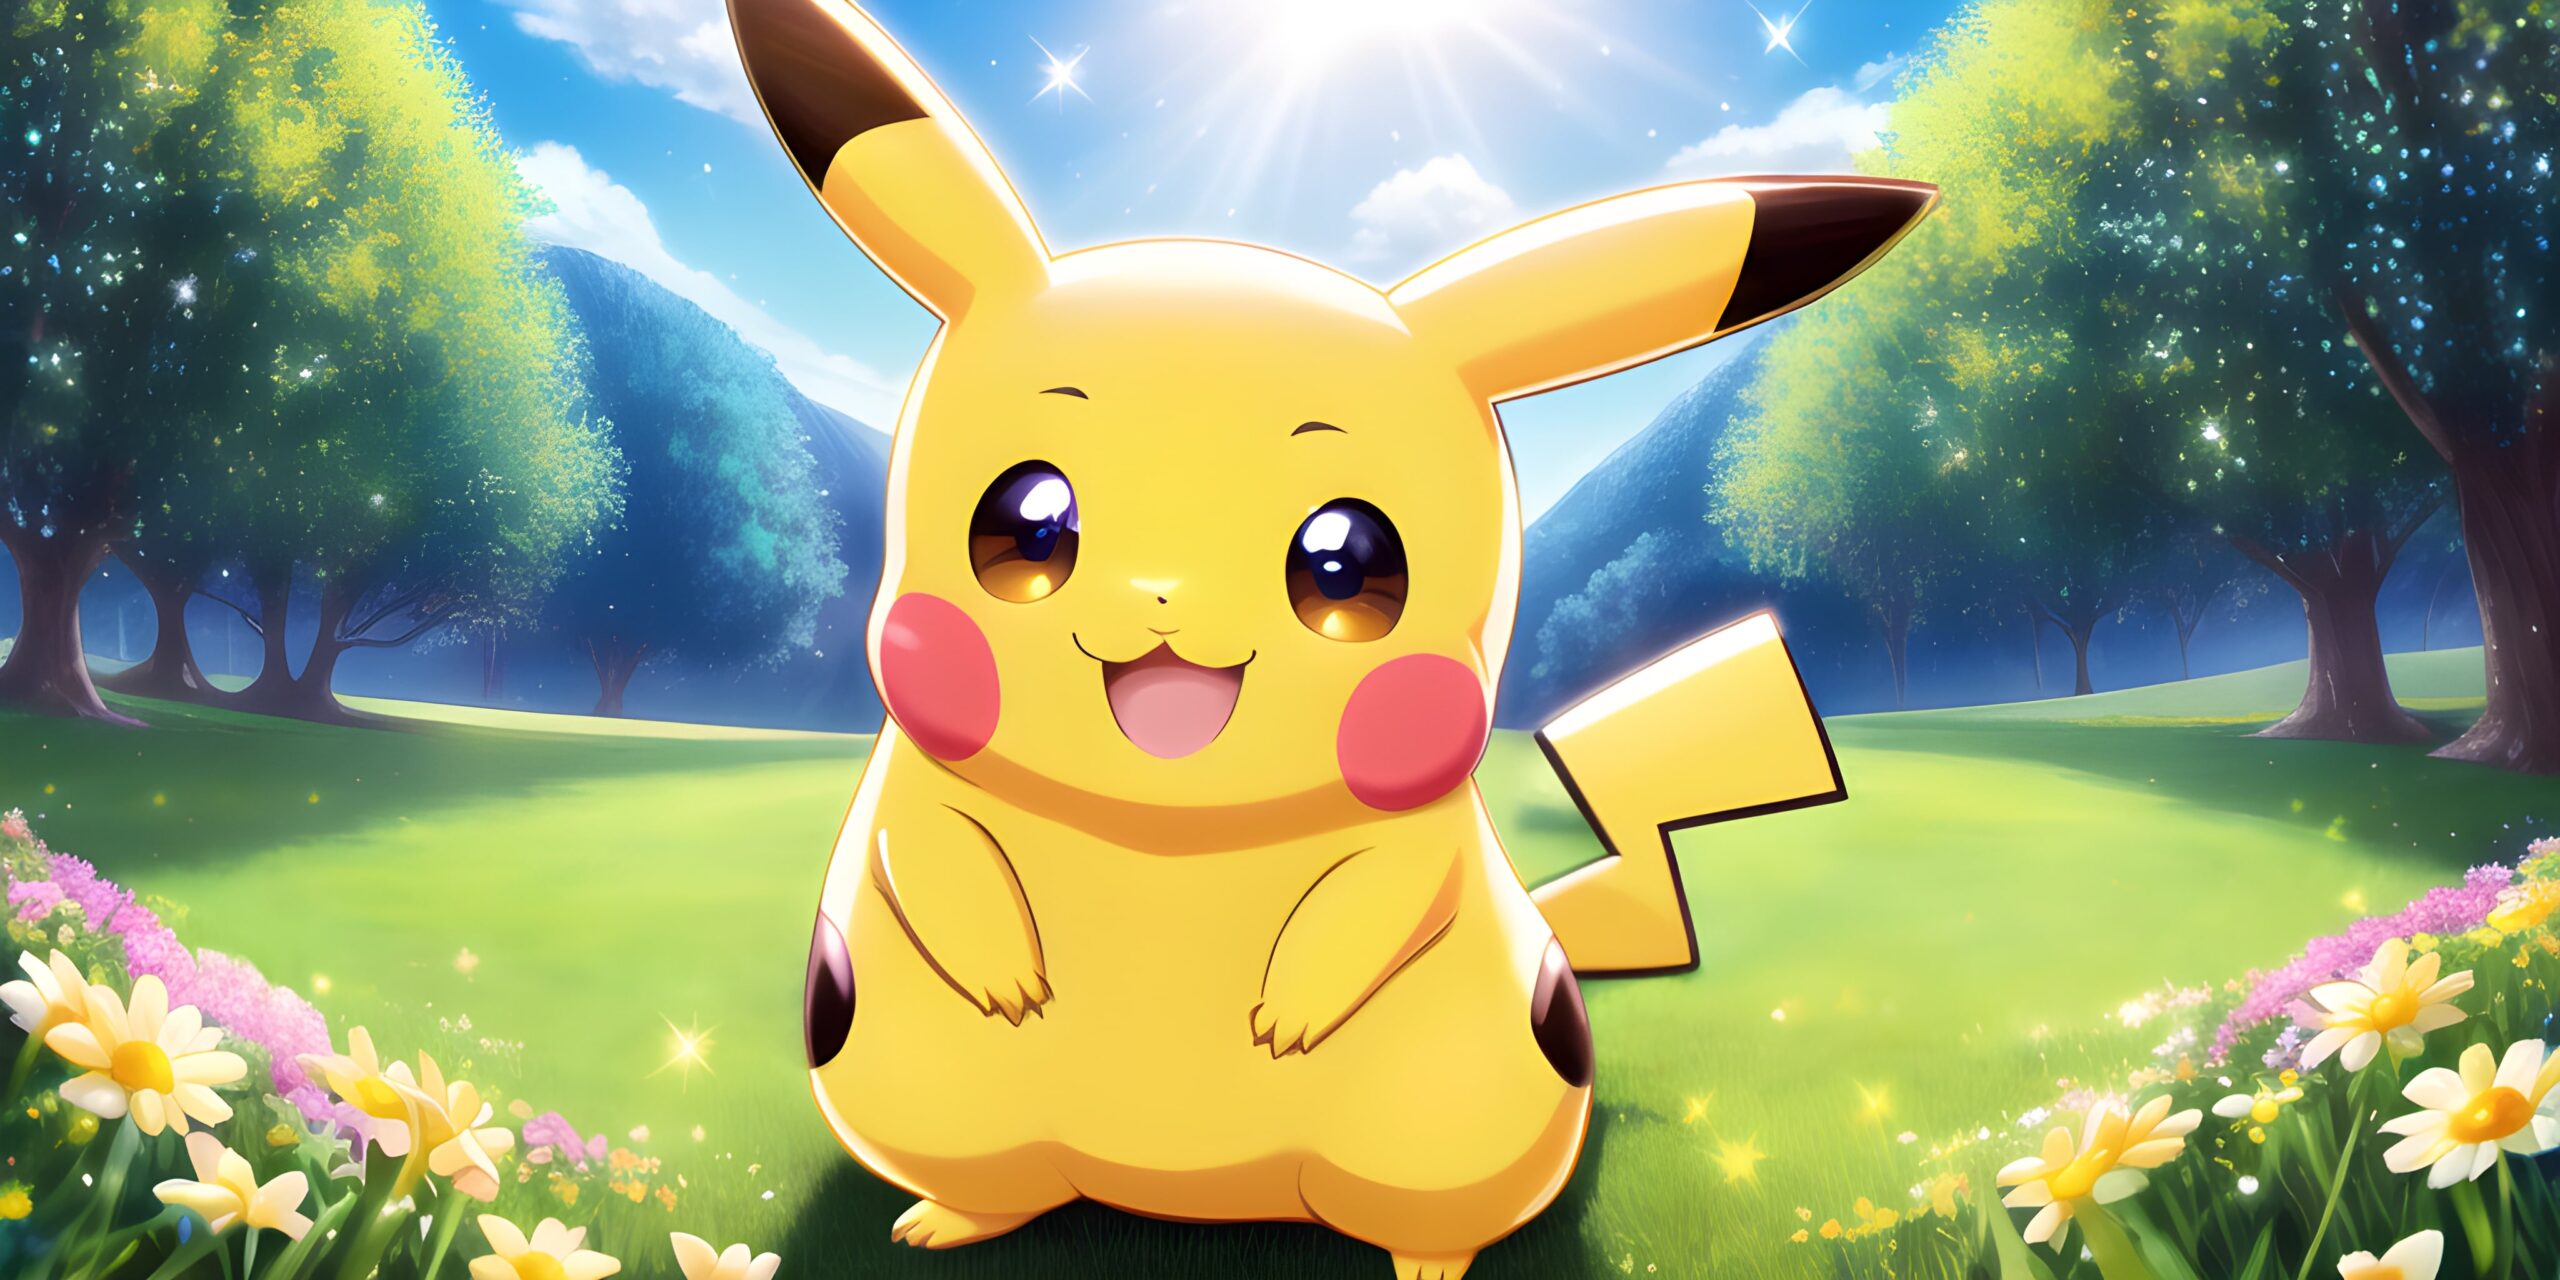 Chubby Pikachu in the Park